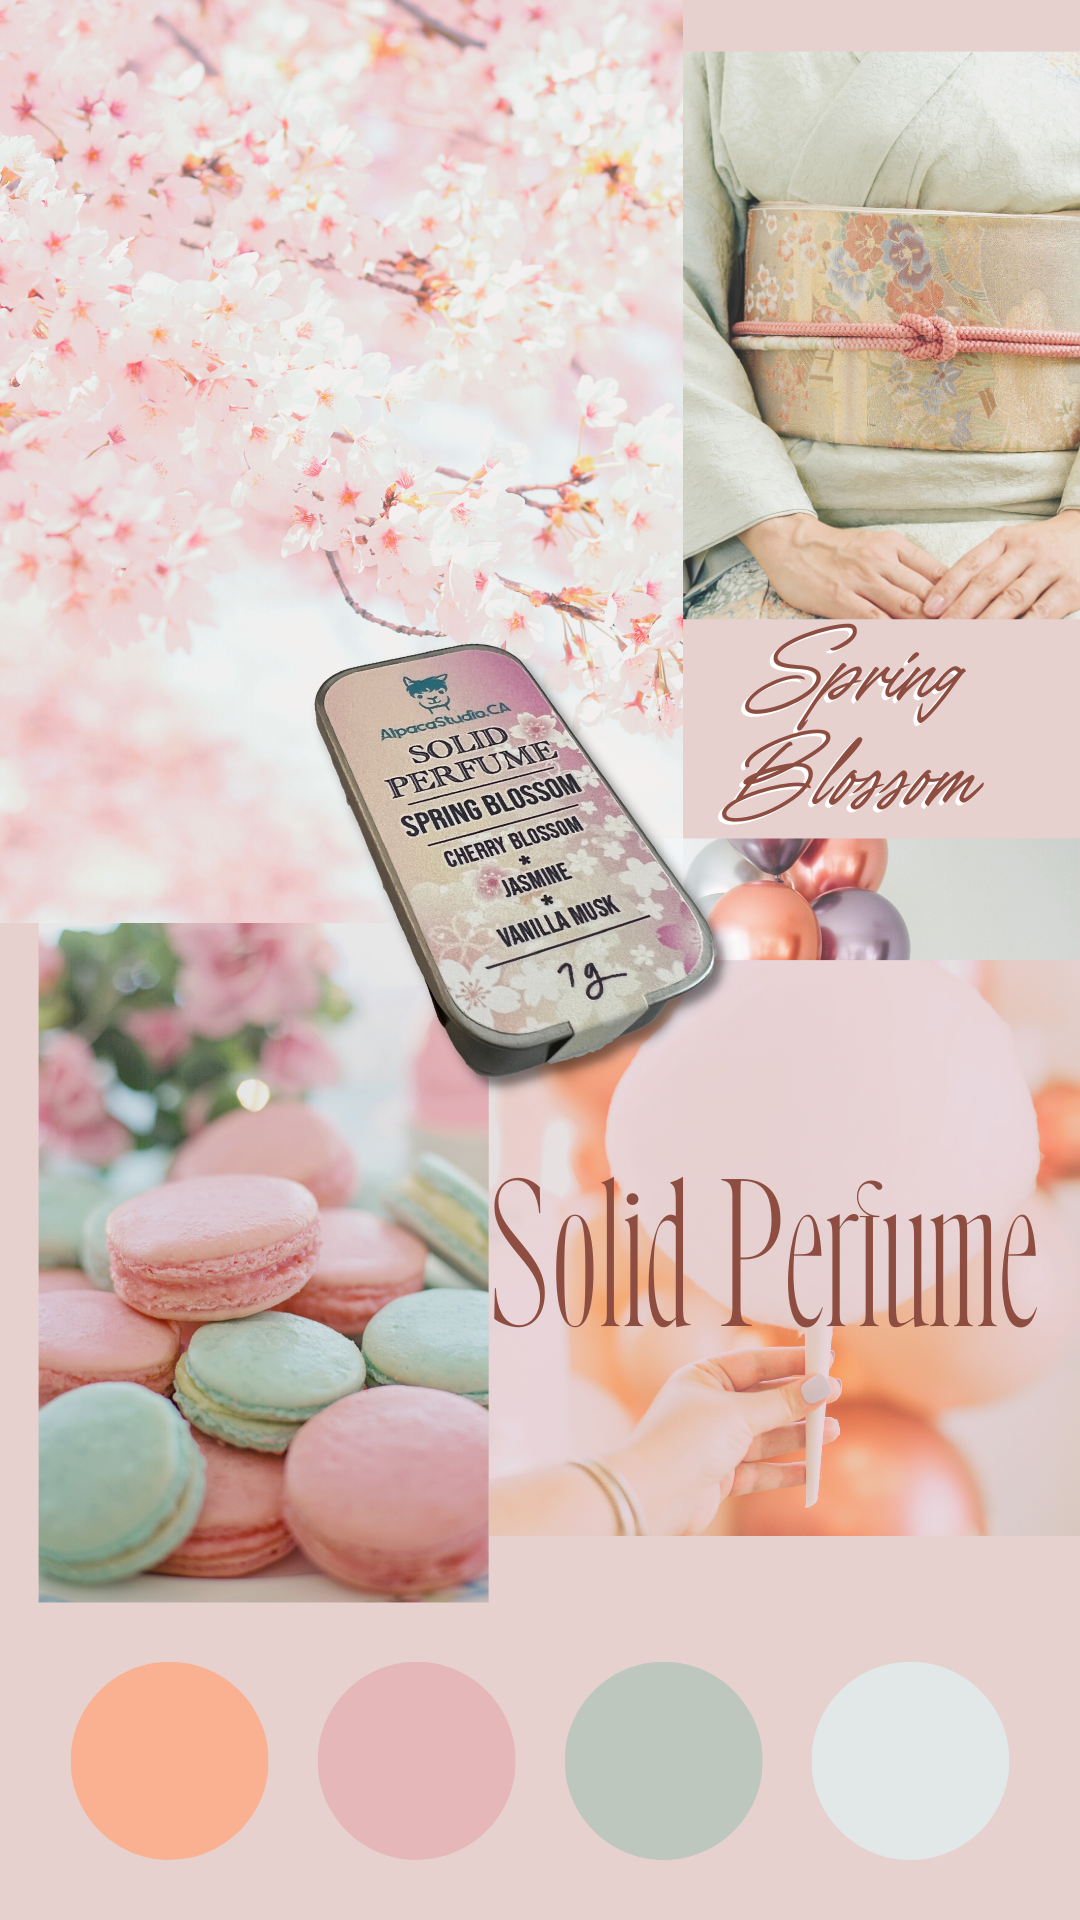 Solid Perfume - Spring Blossom